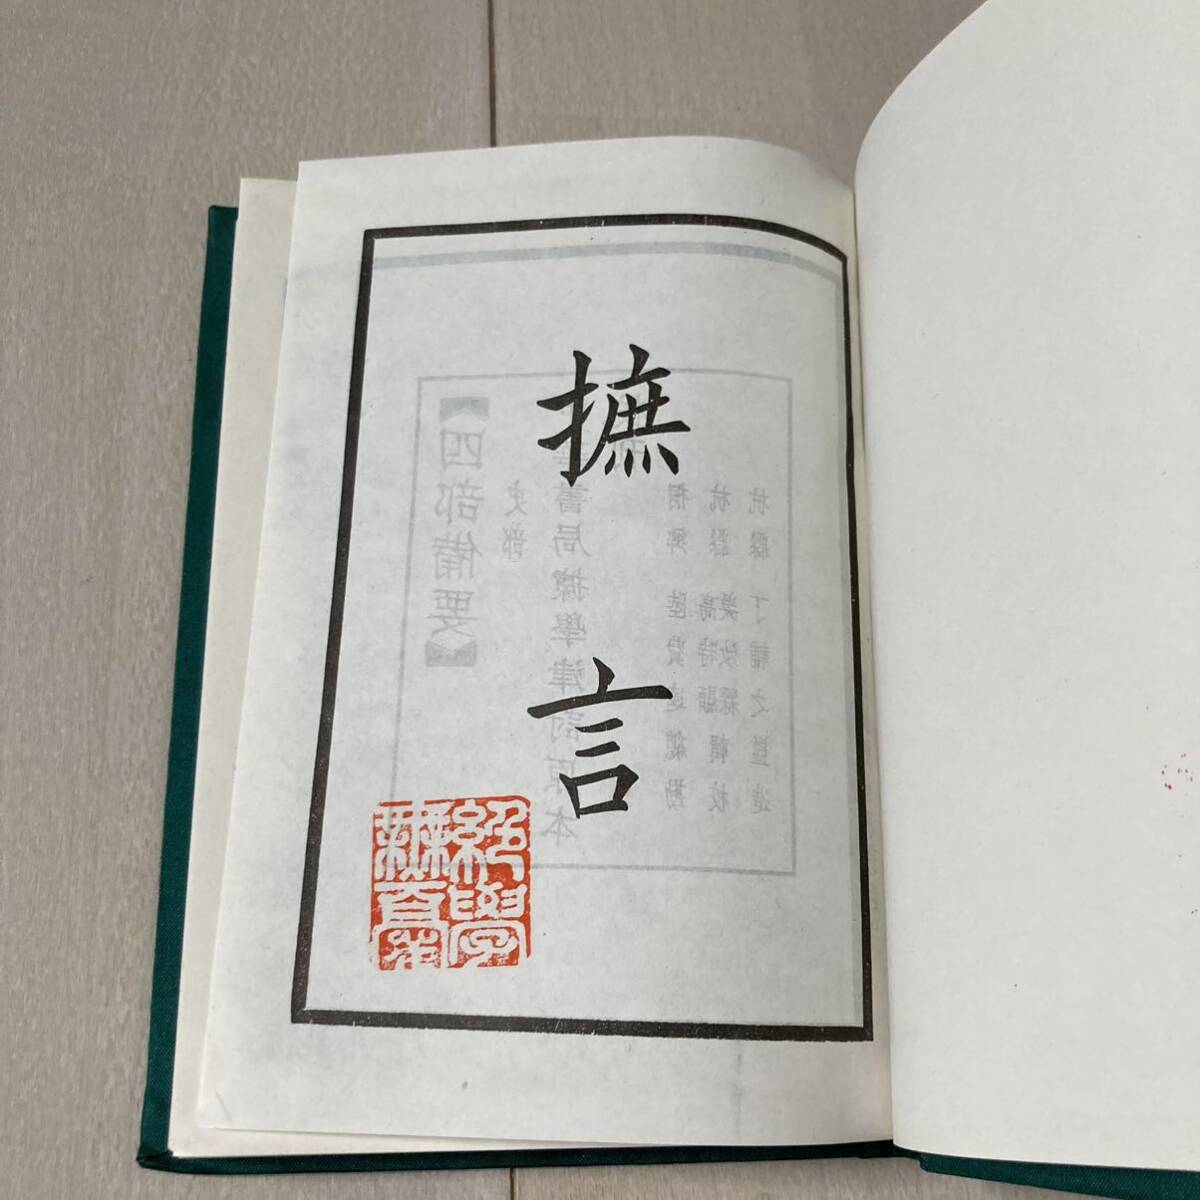 J Chinese ..75 year issue Tang book@. seal version . equipment book@[.... Indigo chronicle .. -years old hour chronicle ]